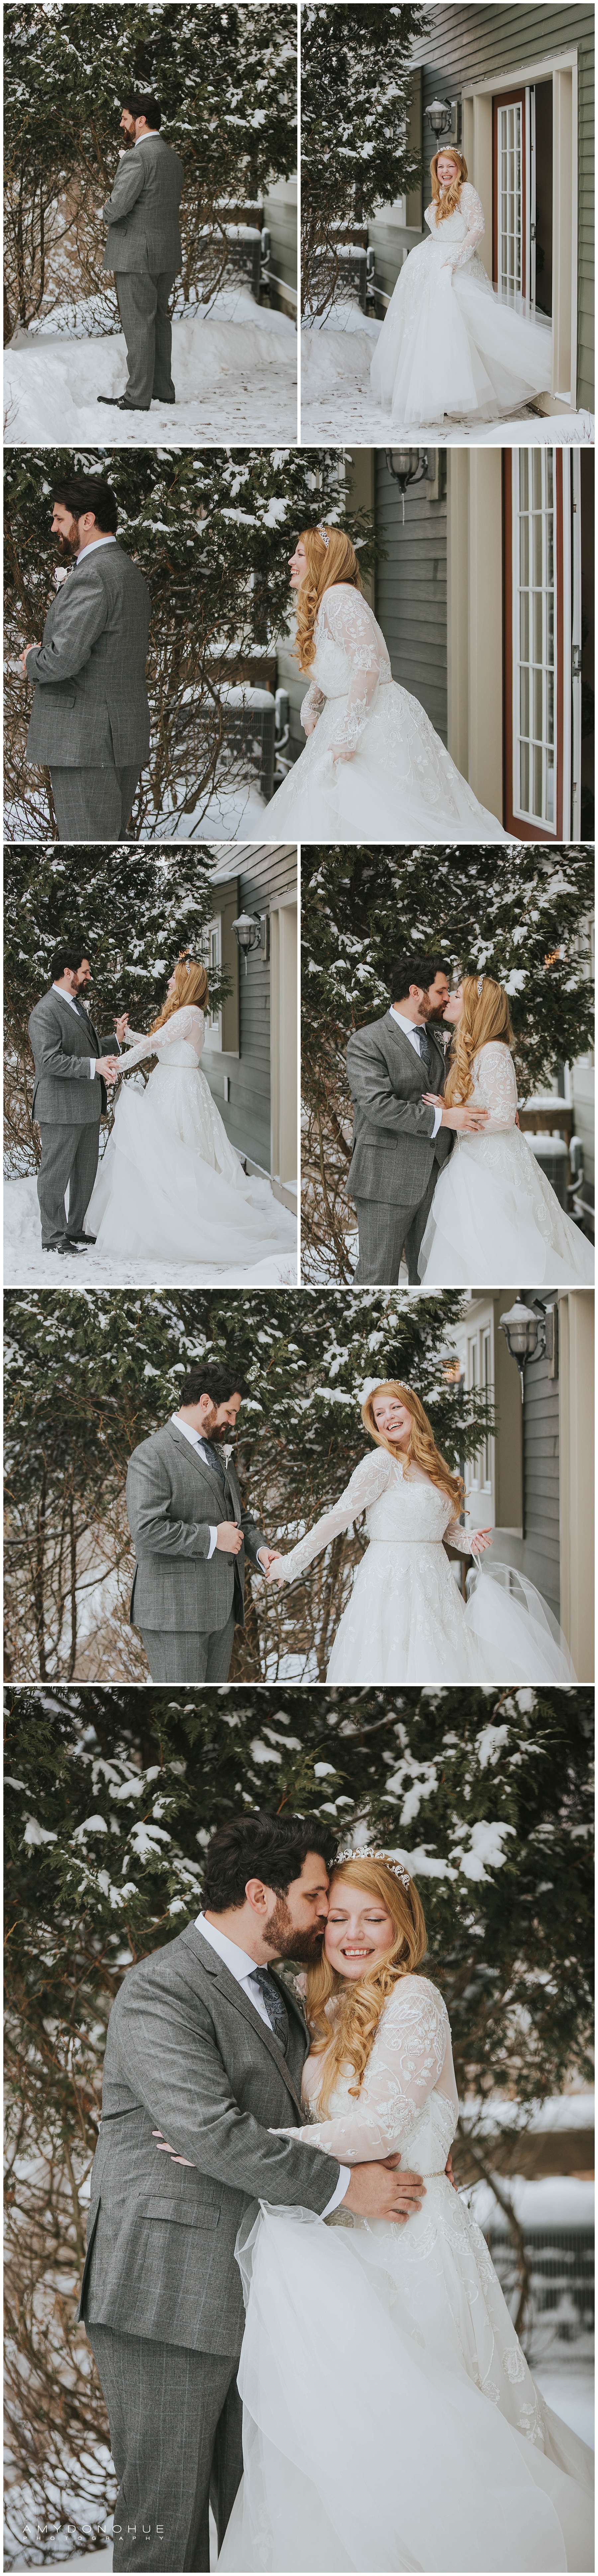 Snowy First Look | Vermont Wedding Photographer | © Amy Donohue Photography